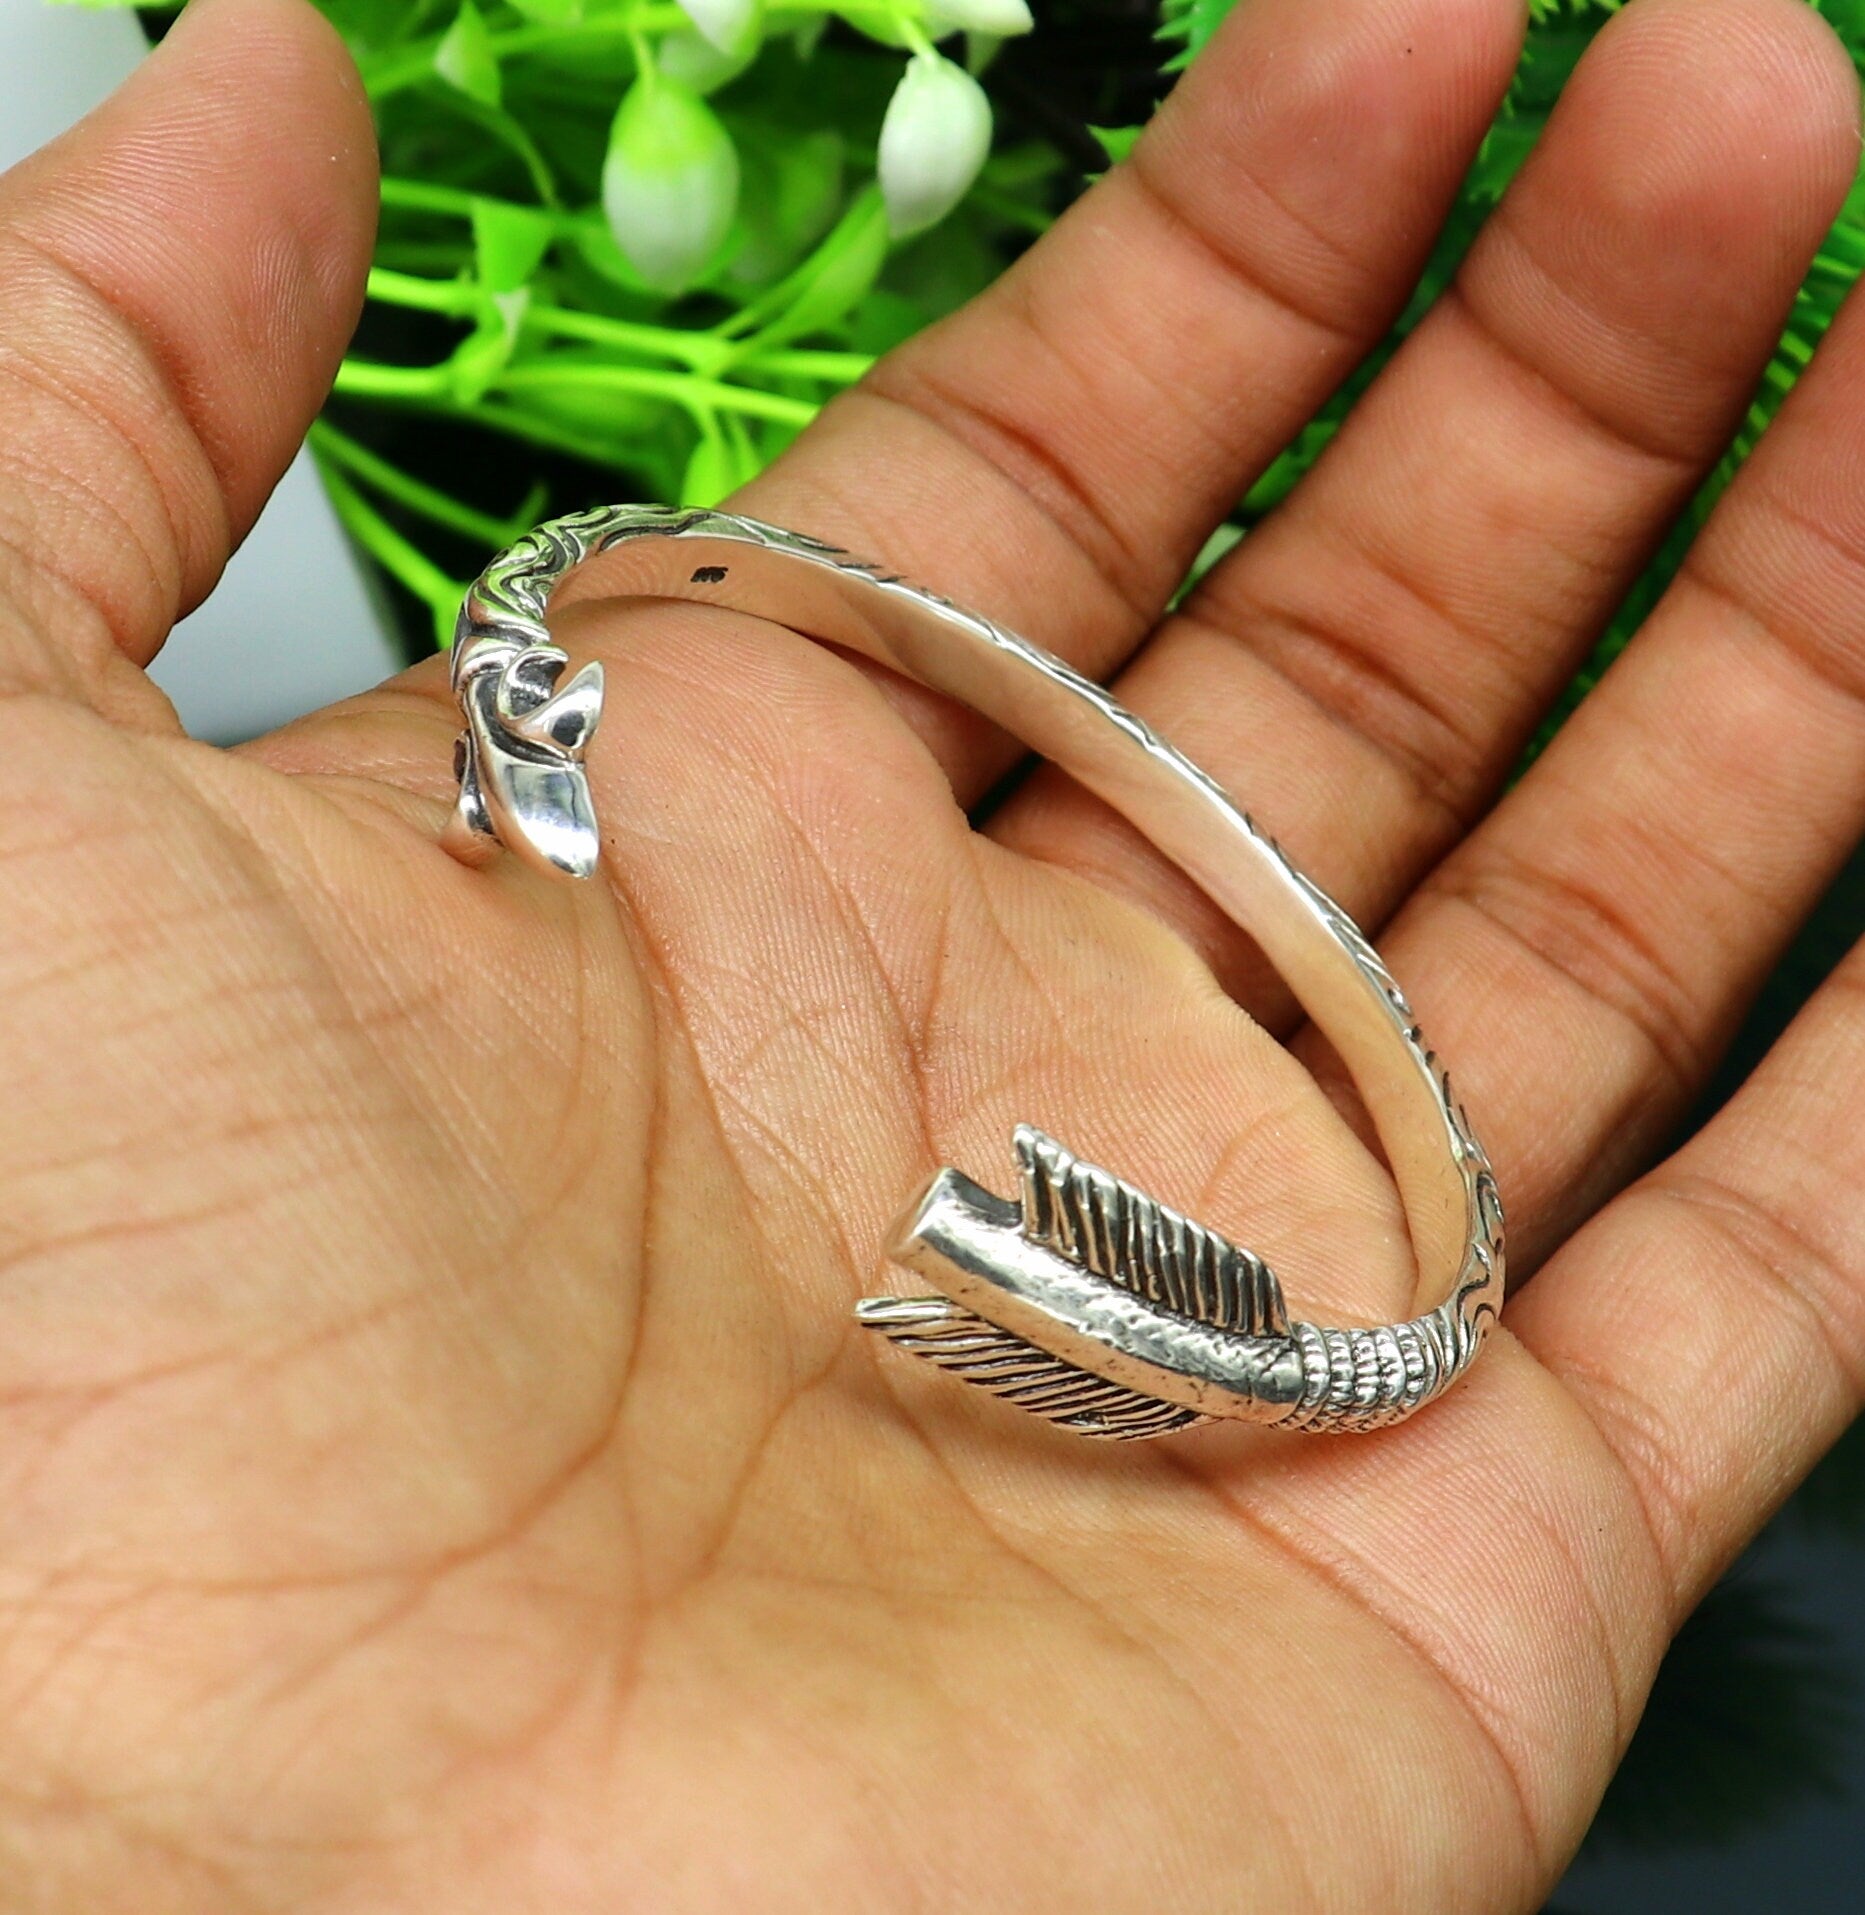 925 sterling silver Arrow style designer bangle bracelet kada, excellent personalized gifting adjustable fancy bangle men's or girls cuff69 - TRIBAL ORNAMENTS